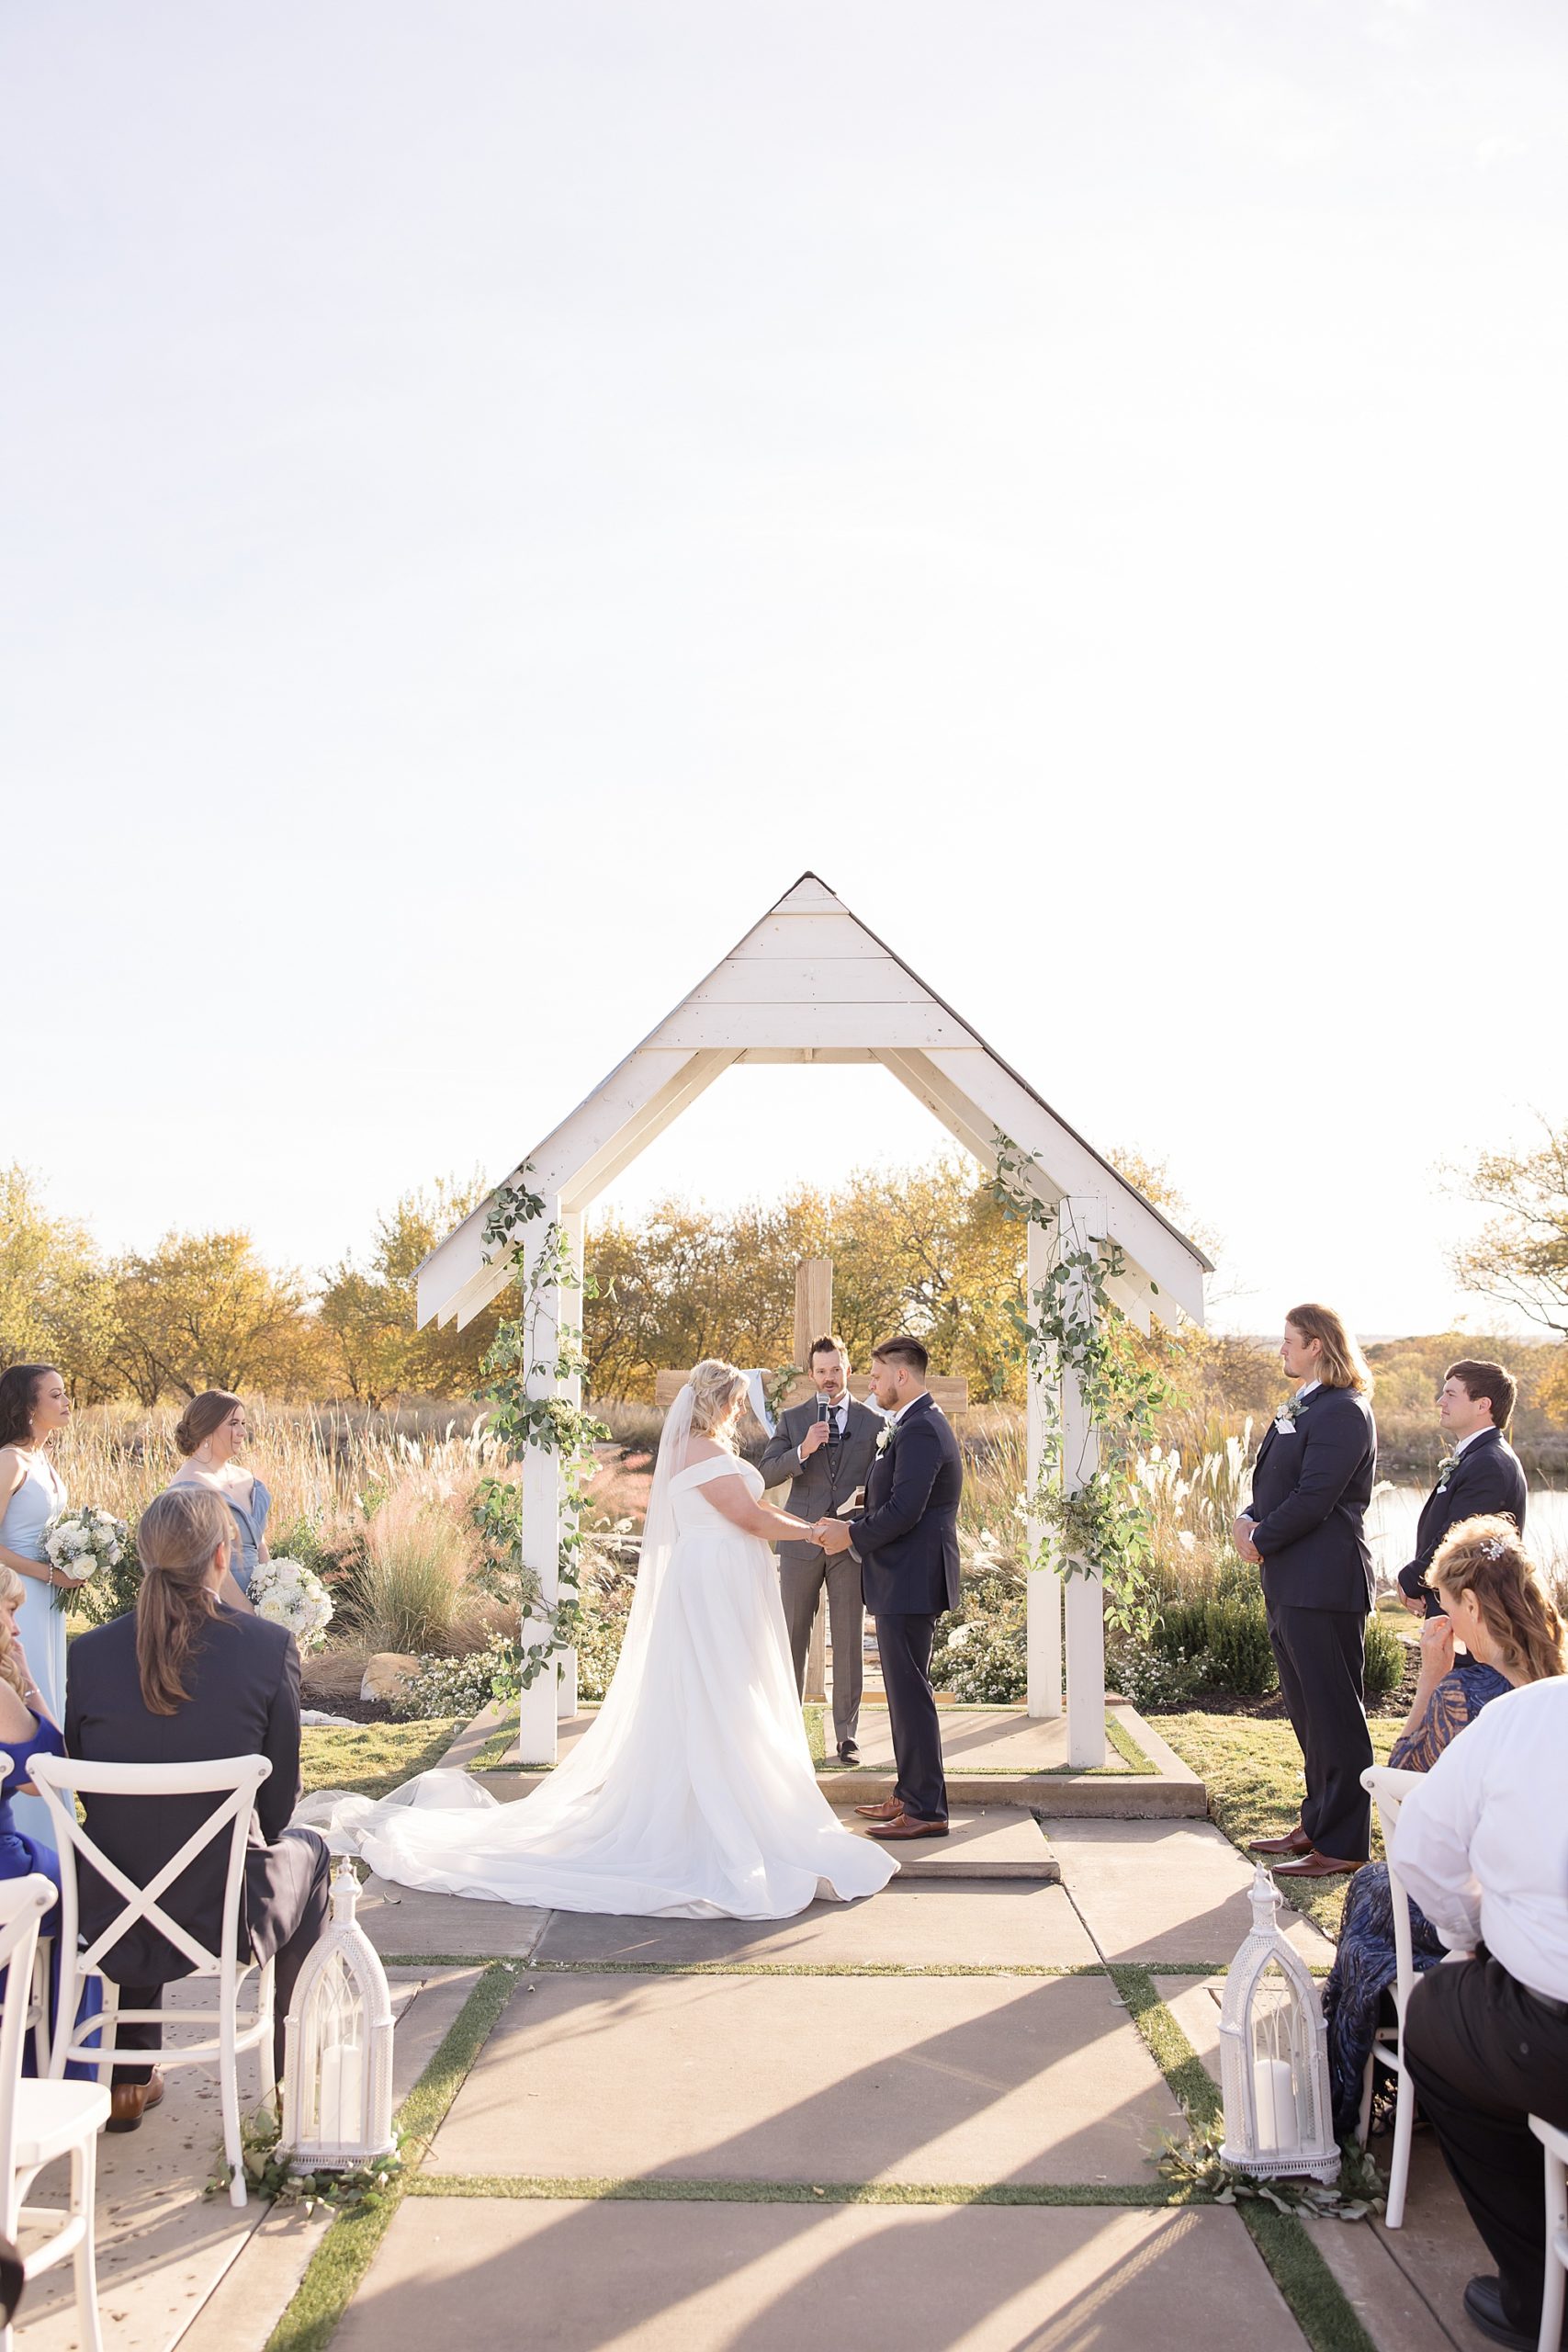 newlyweds exchange vows during outdoor wedding ceremony in Texas